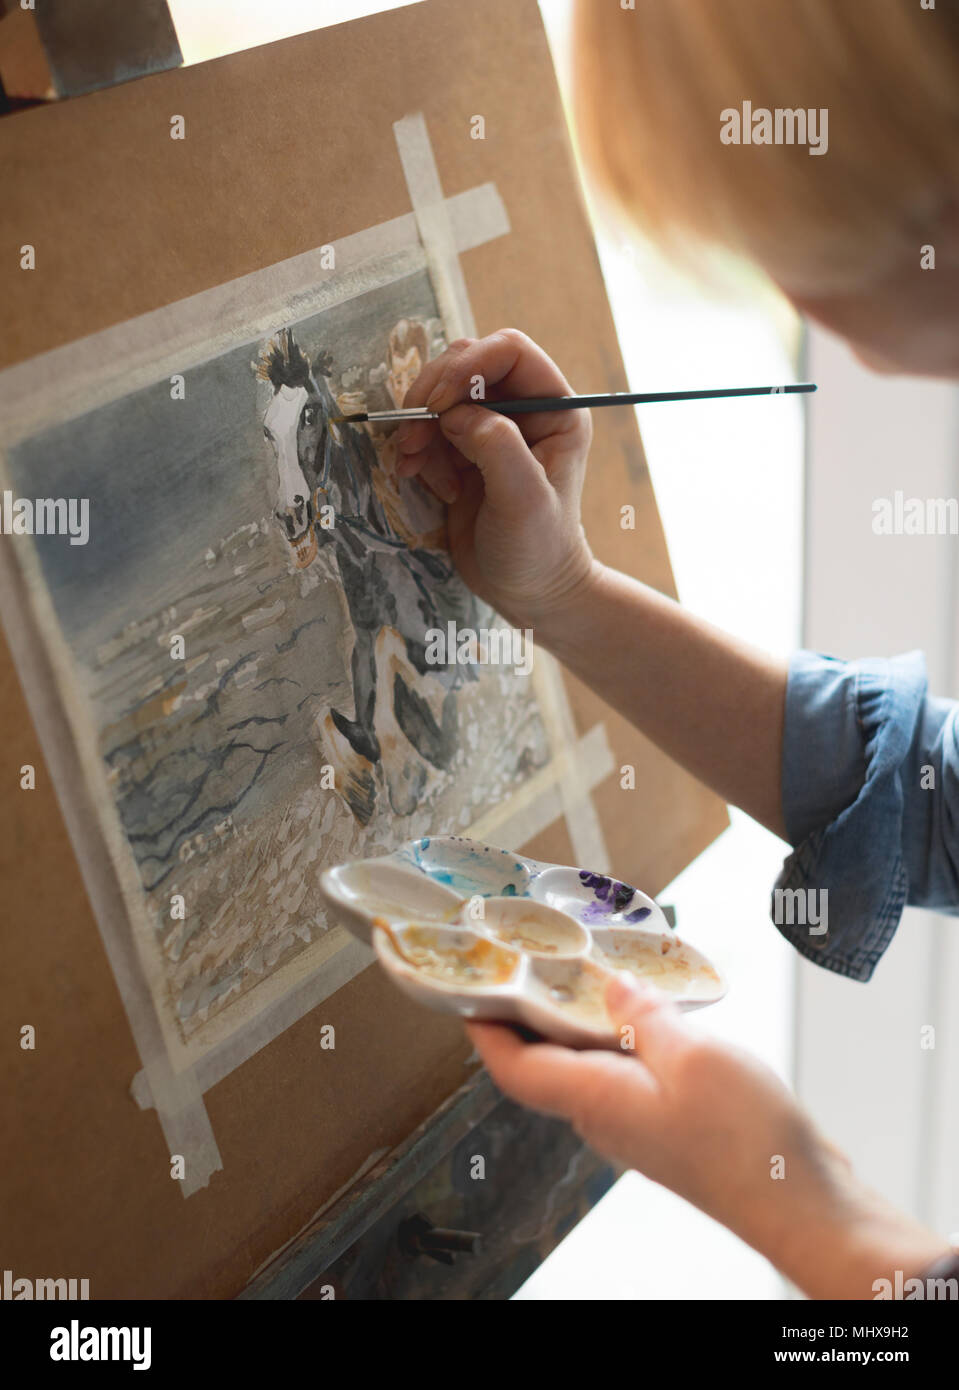 Female artist painting on a canvas with a paintbrush and holding a color palette Stock Photo